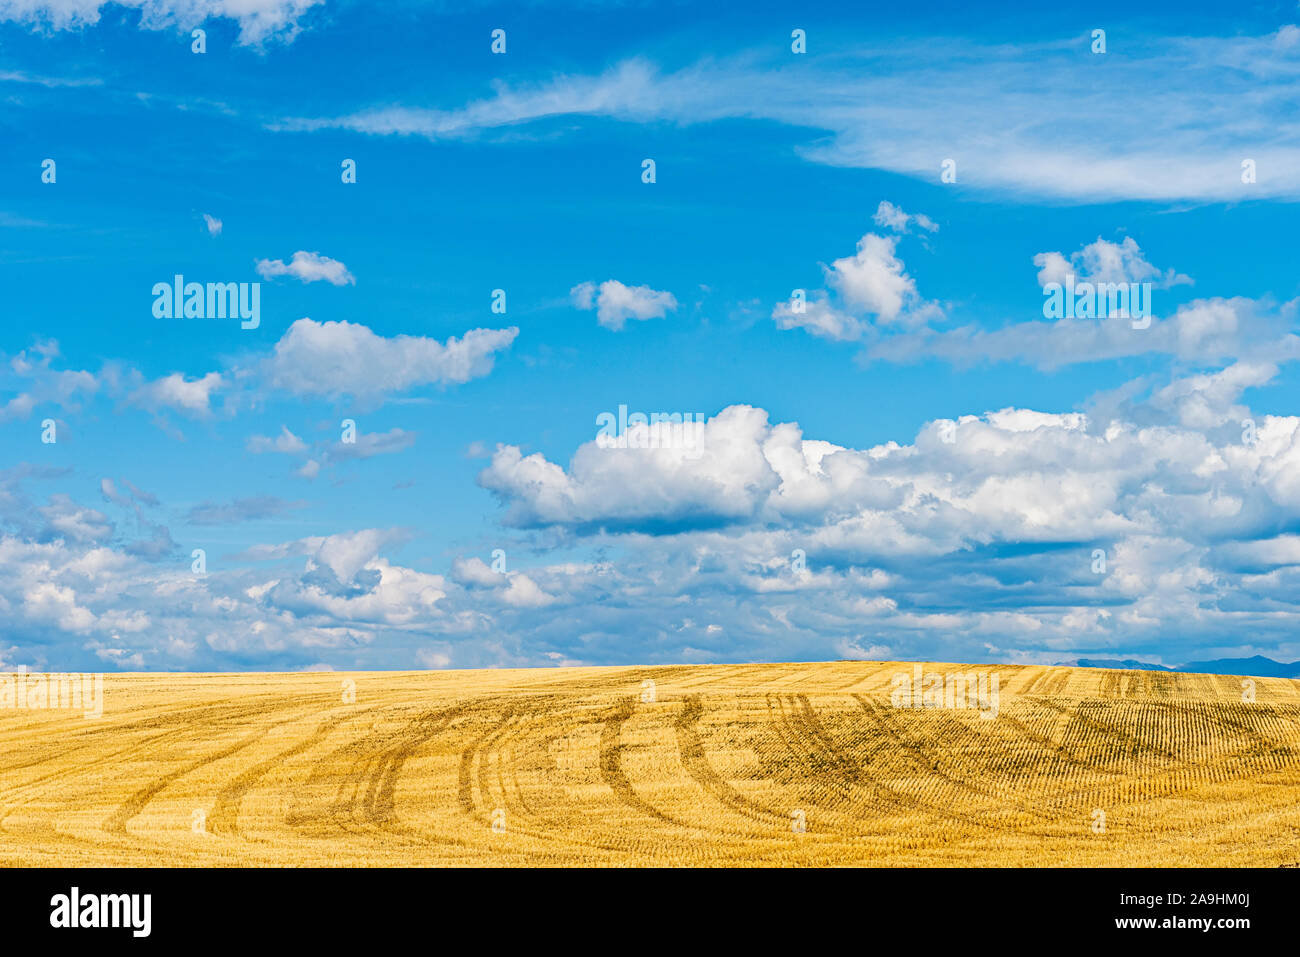 Yellow harvested grain fields under a blue sky with white fluffy clouds. Stock Photo